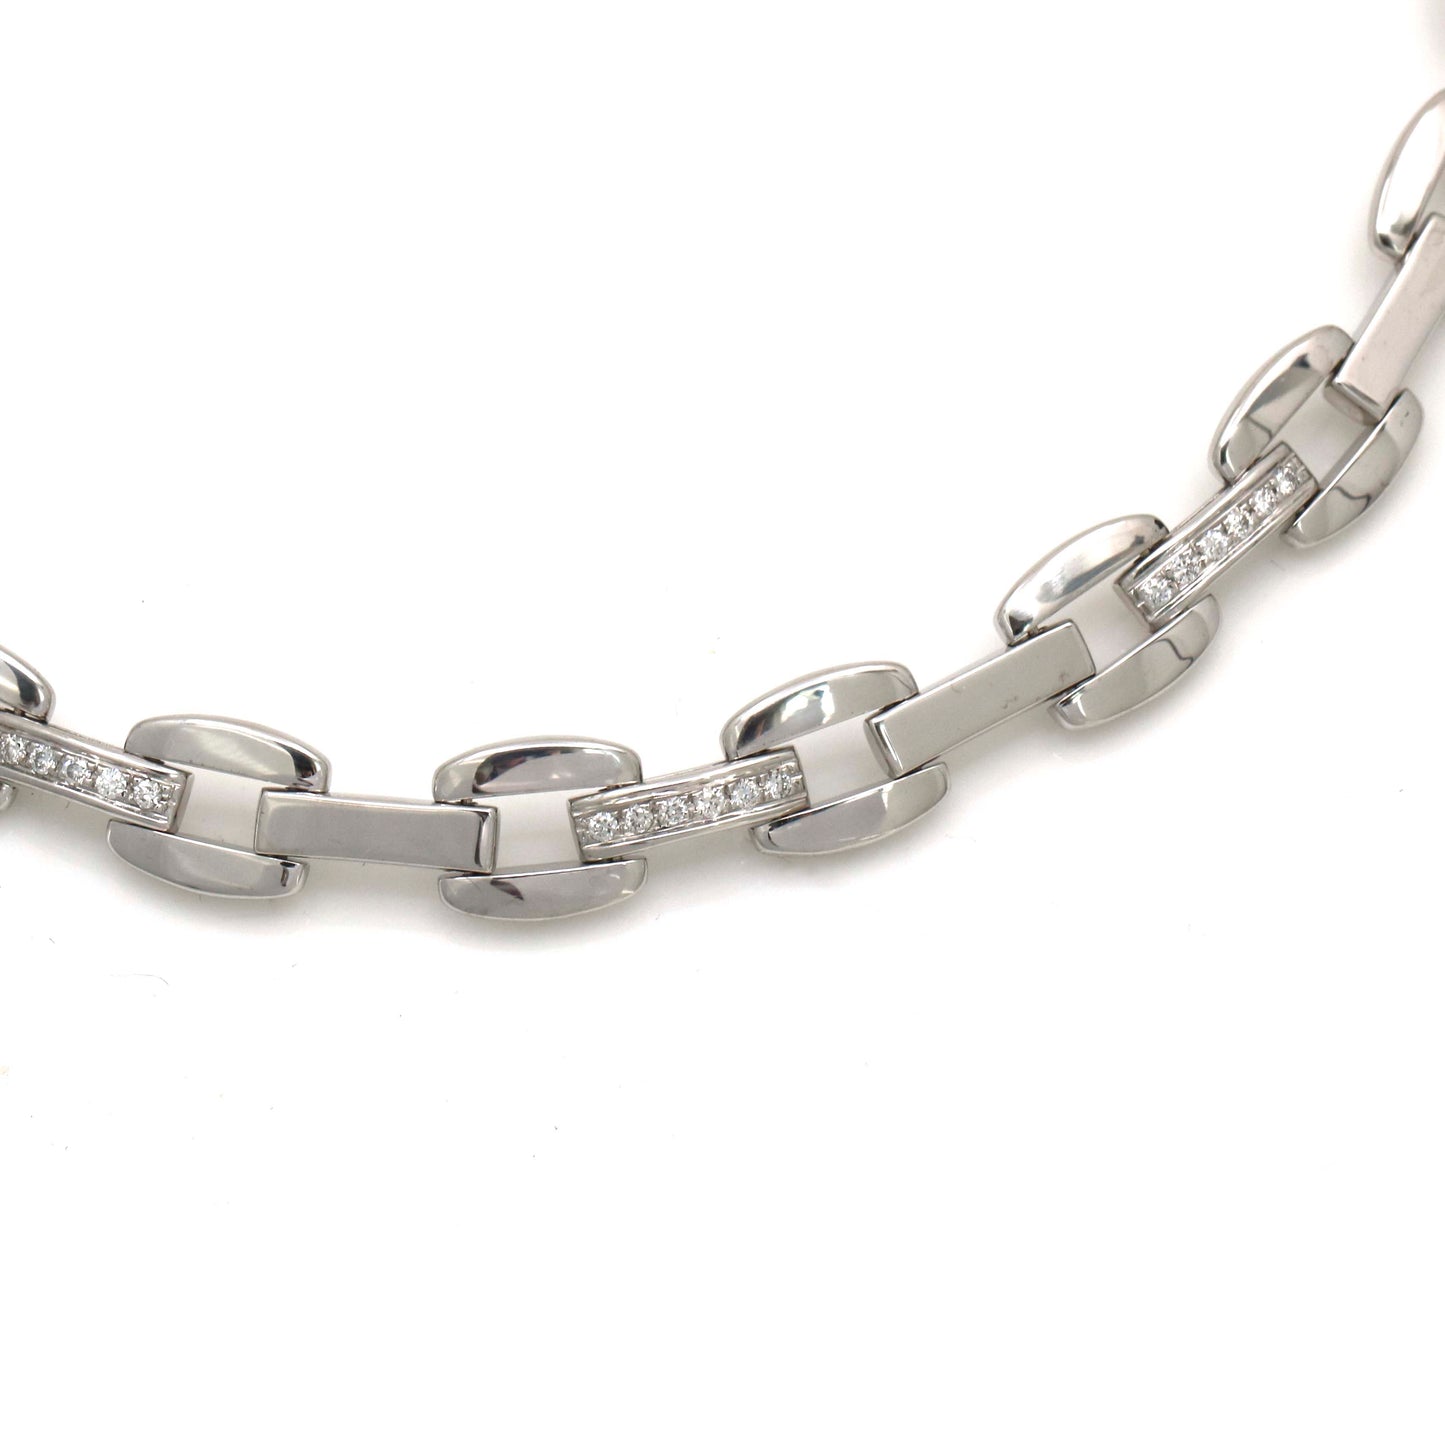 Vintage Roberto Coin 18k White Gold Choker Chain Necklace with Diamonds